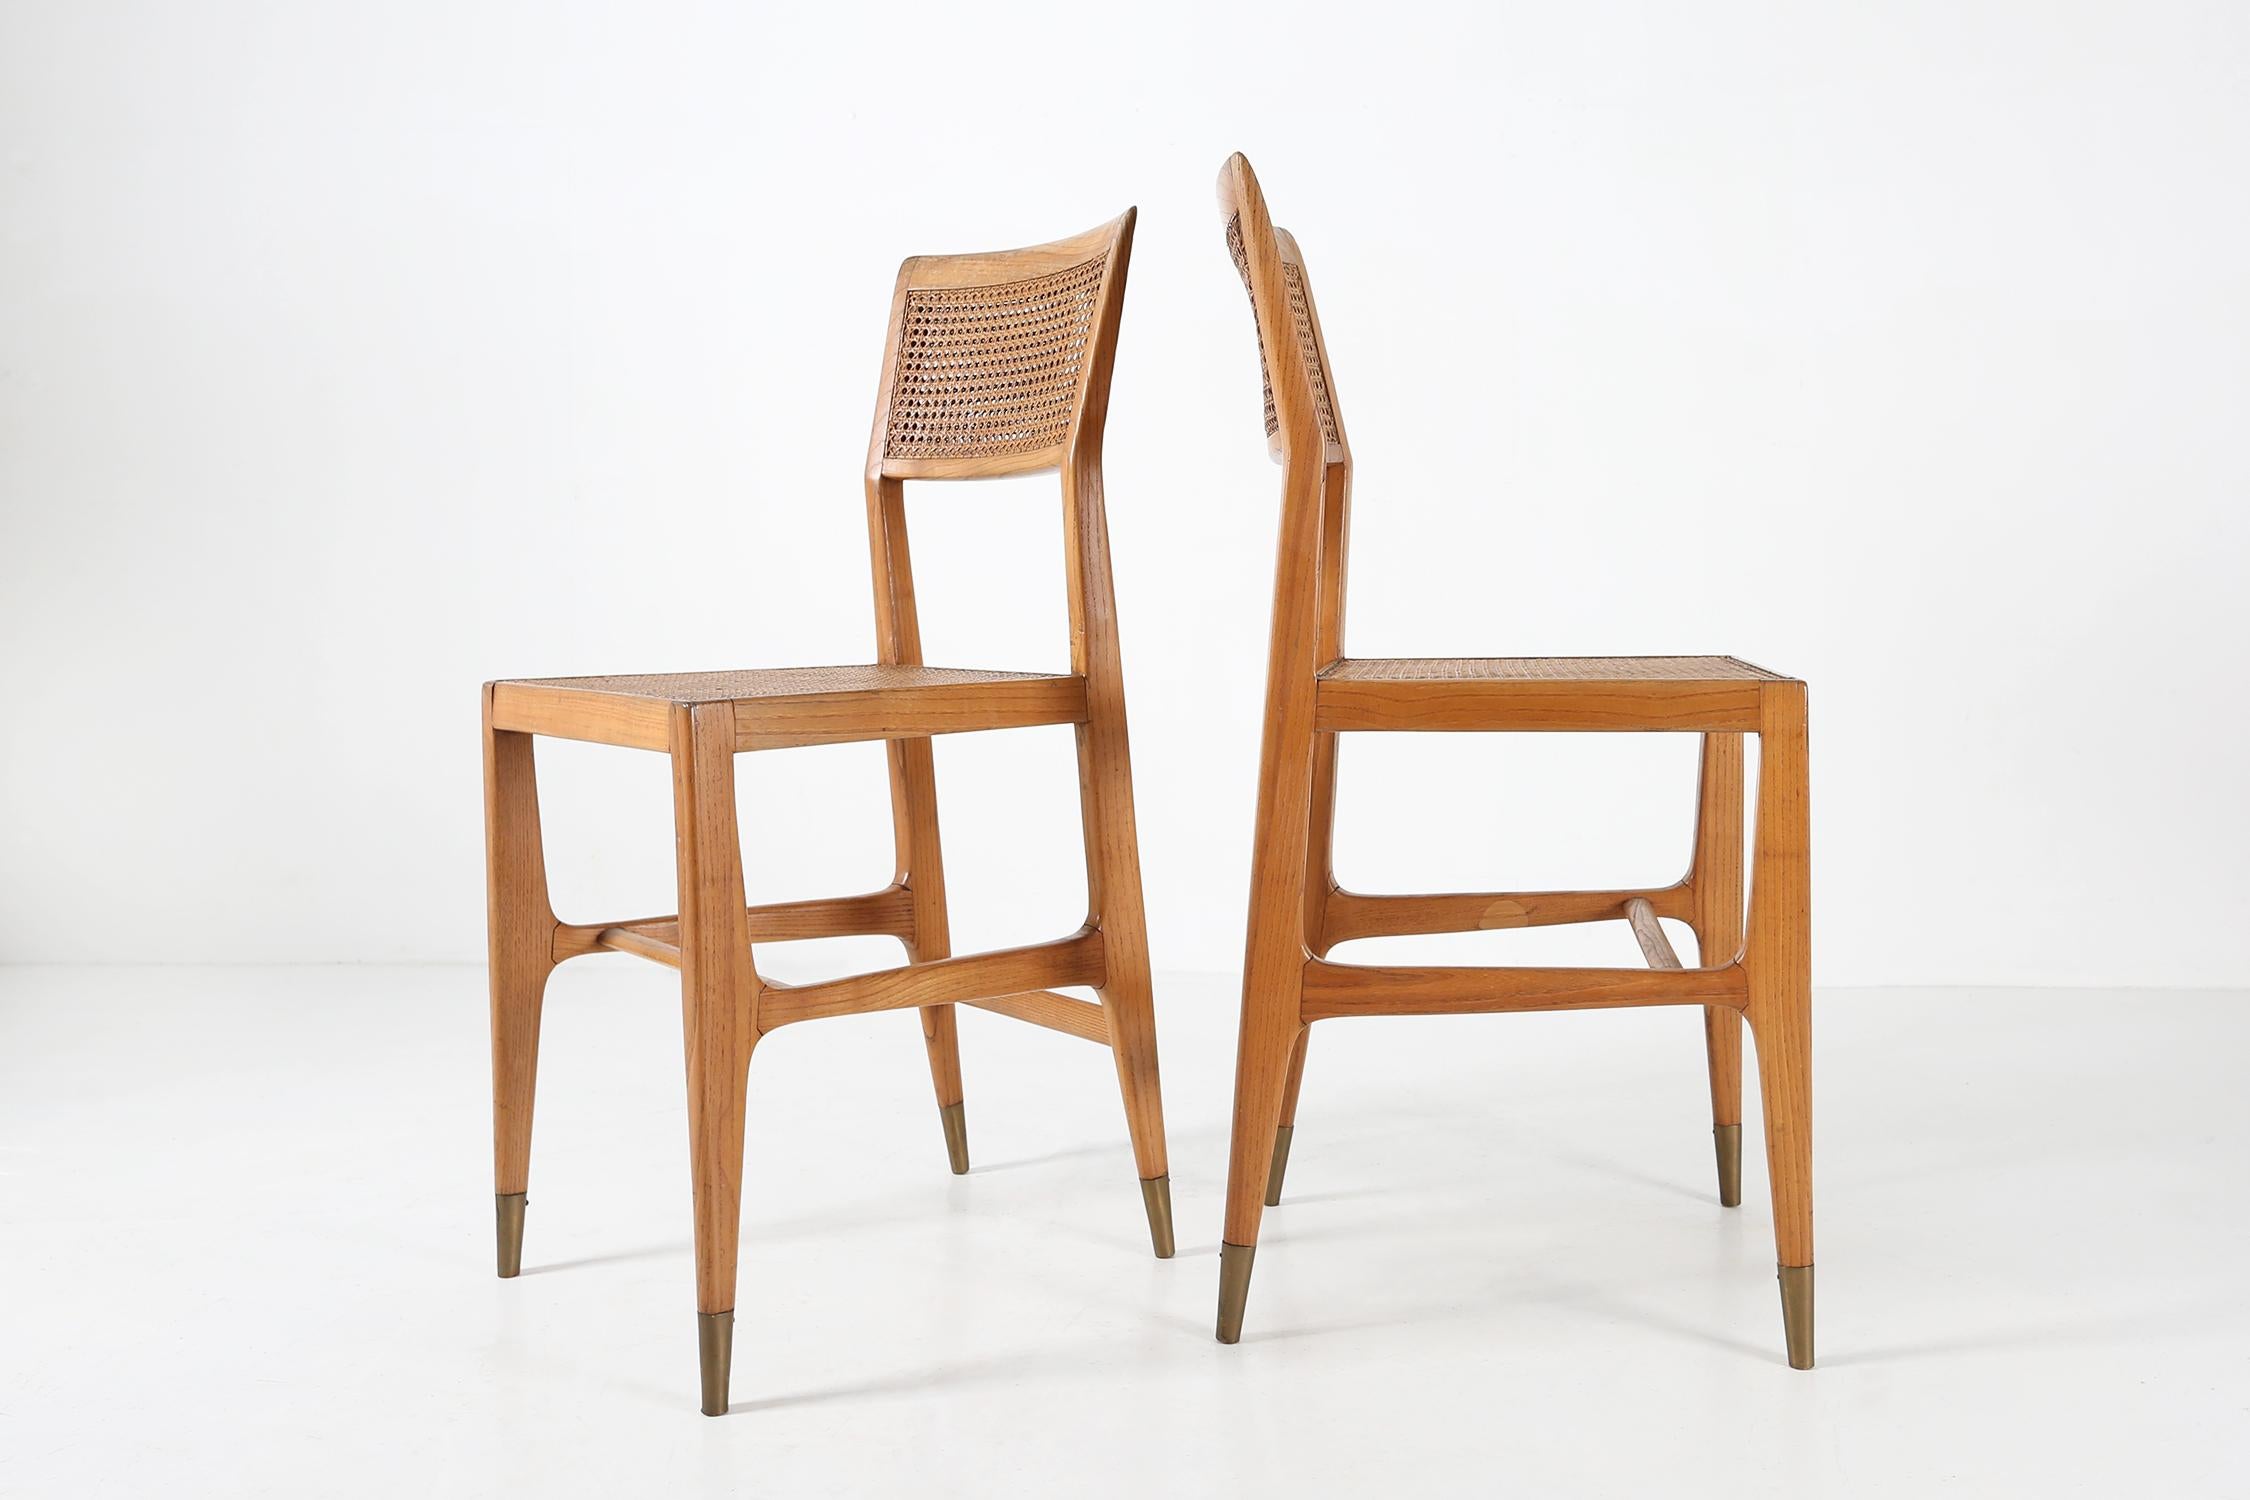 Set of two chairs designed by Gio Ponti in 1951 exclusive for the San Remo Casino.
In natural ash wood with seat and back in woven cane, Legs with brass tips.

These rare chairs are made to sit on the roulette table. The seat height is slightly